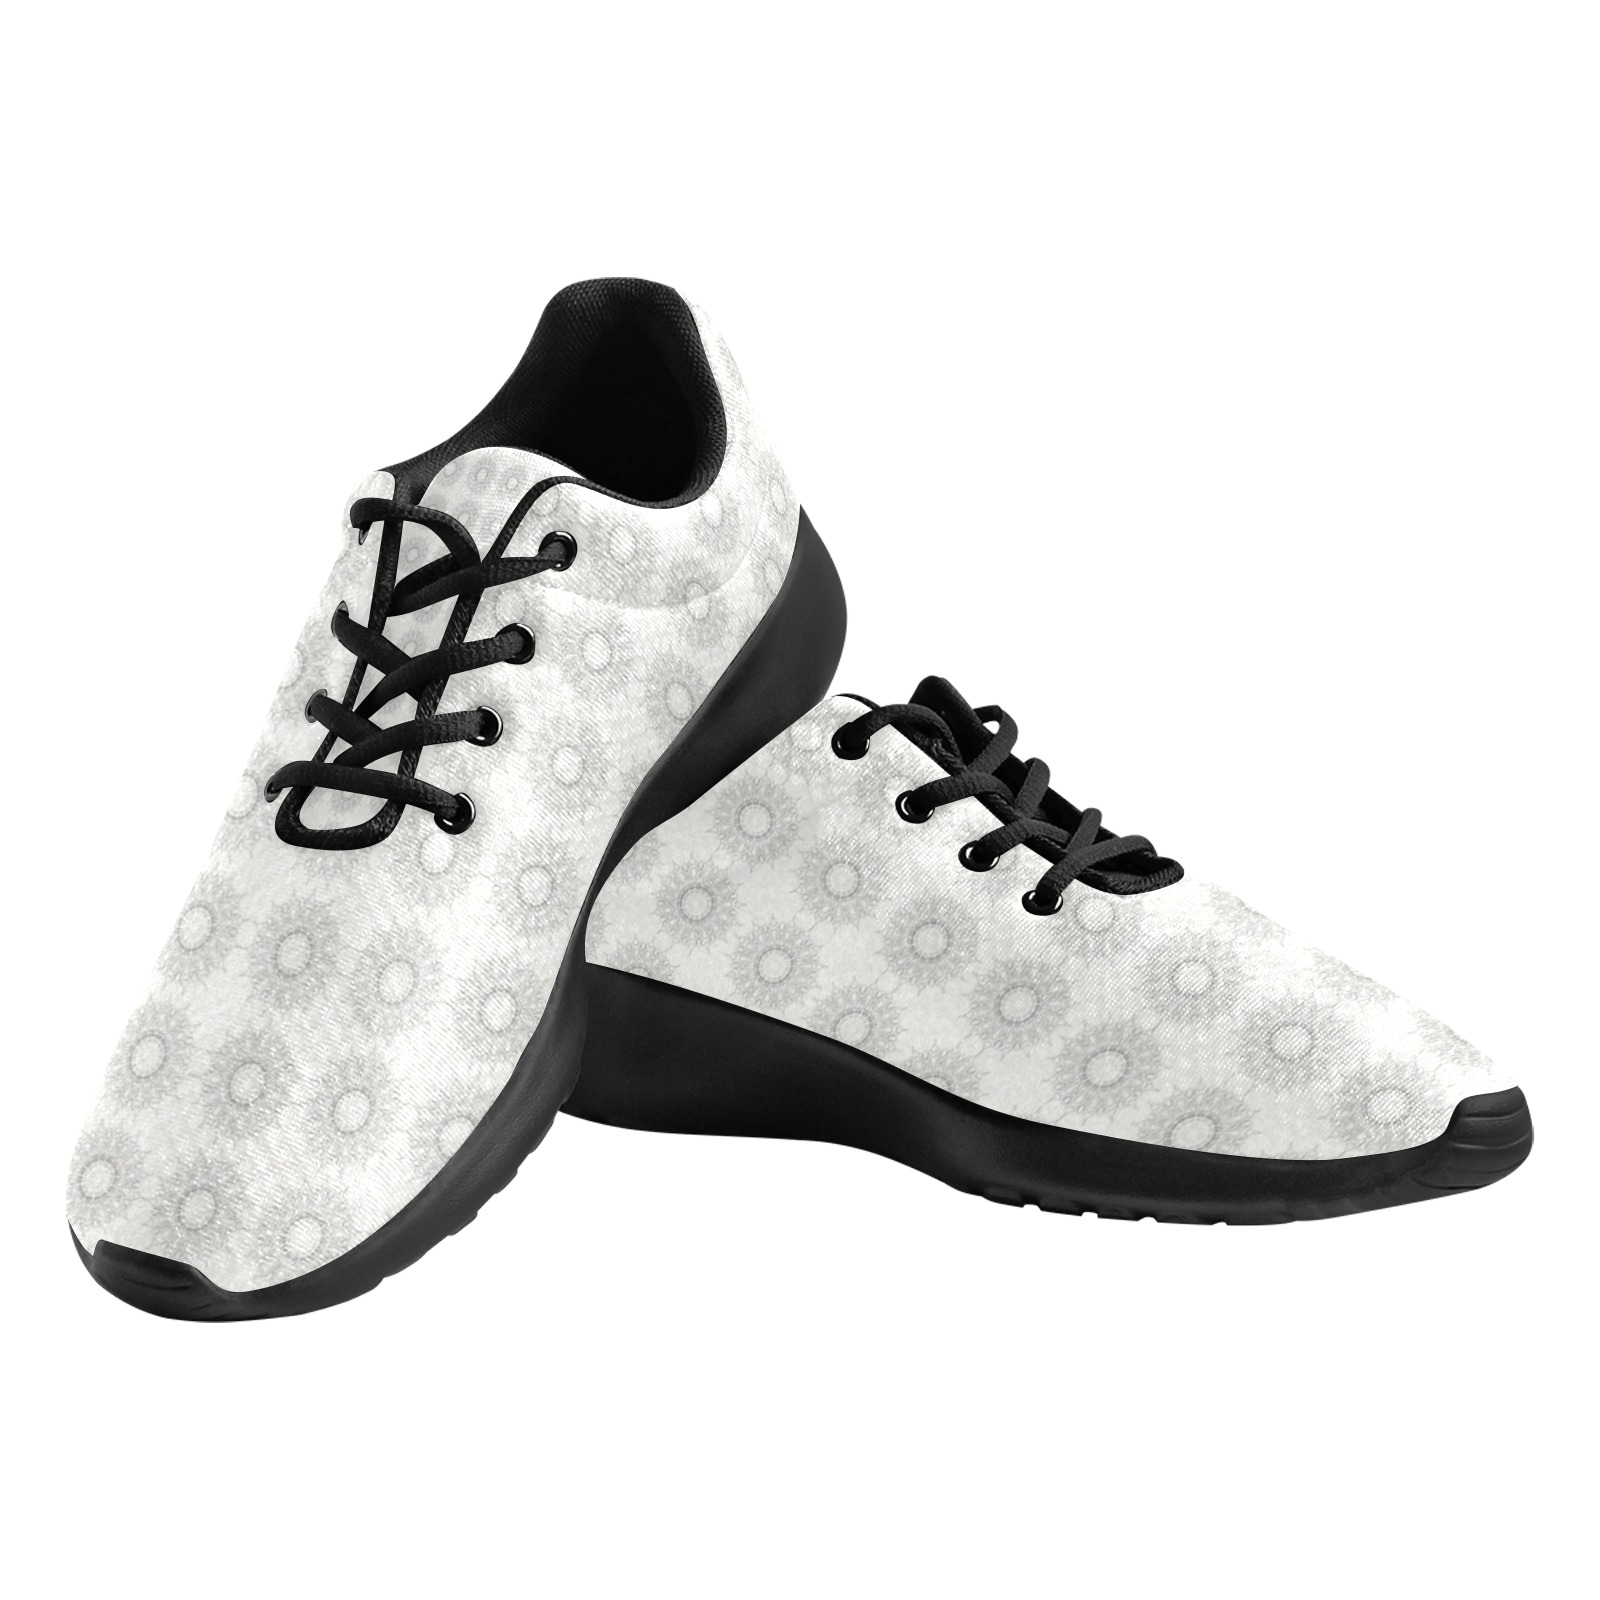 Little white floral fallen to the rural pattern Men's Athletic Shoes (Model 0200)